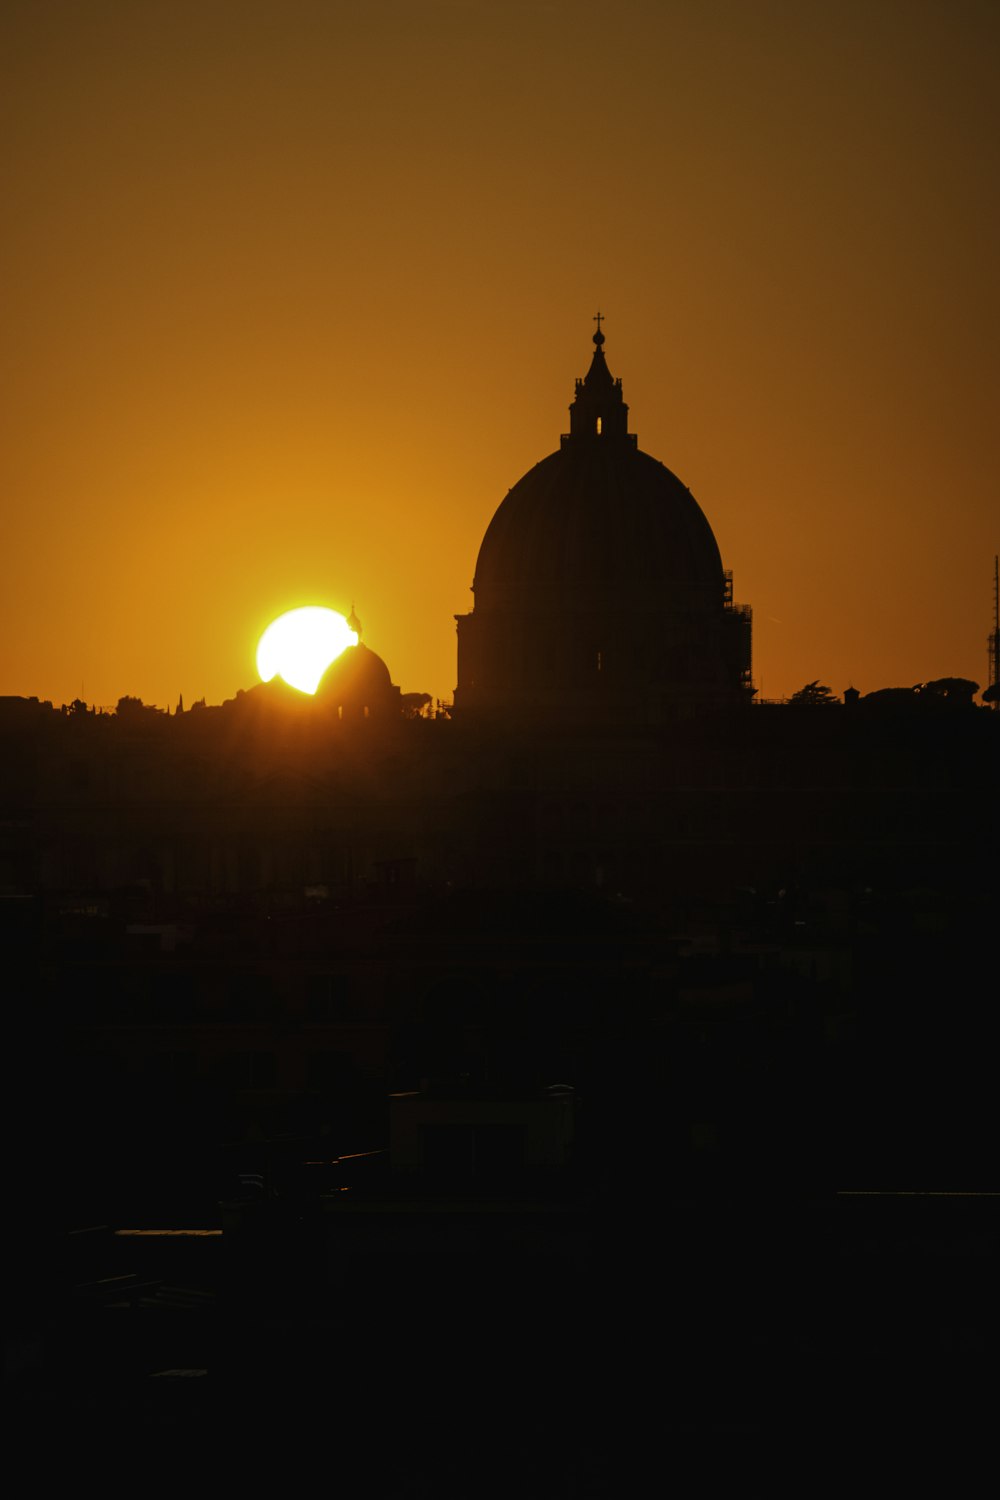 the sun is setting behind a building with a dome